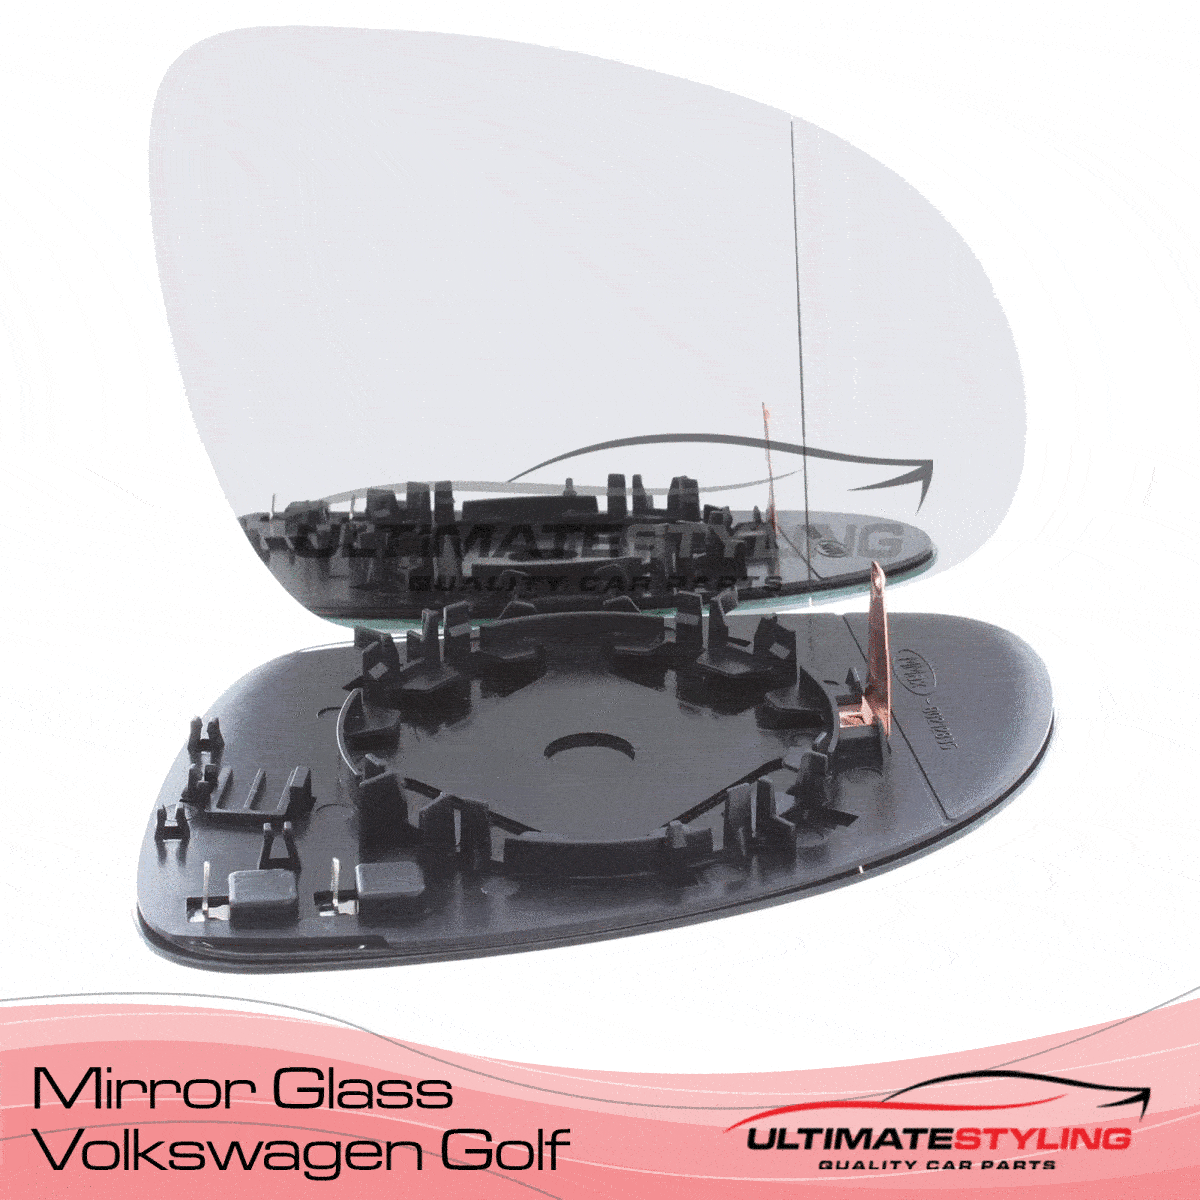 360 view of a vw Golf wing mirror glass replacement